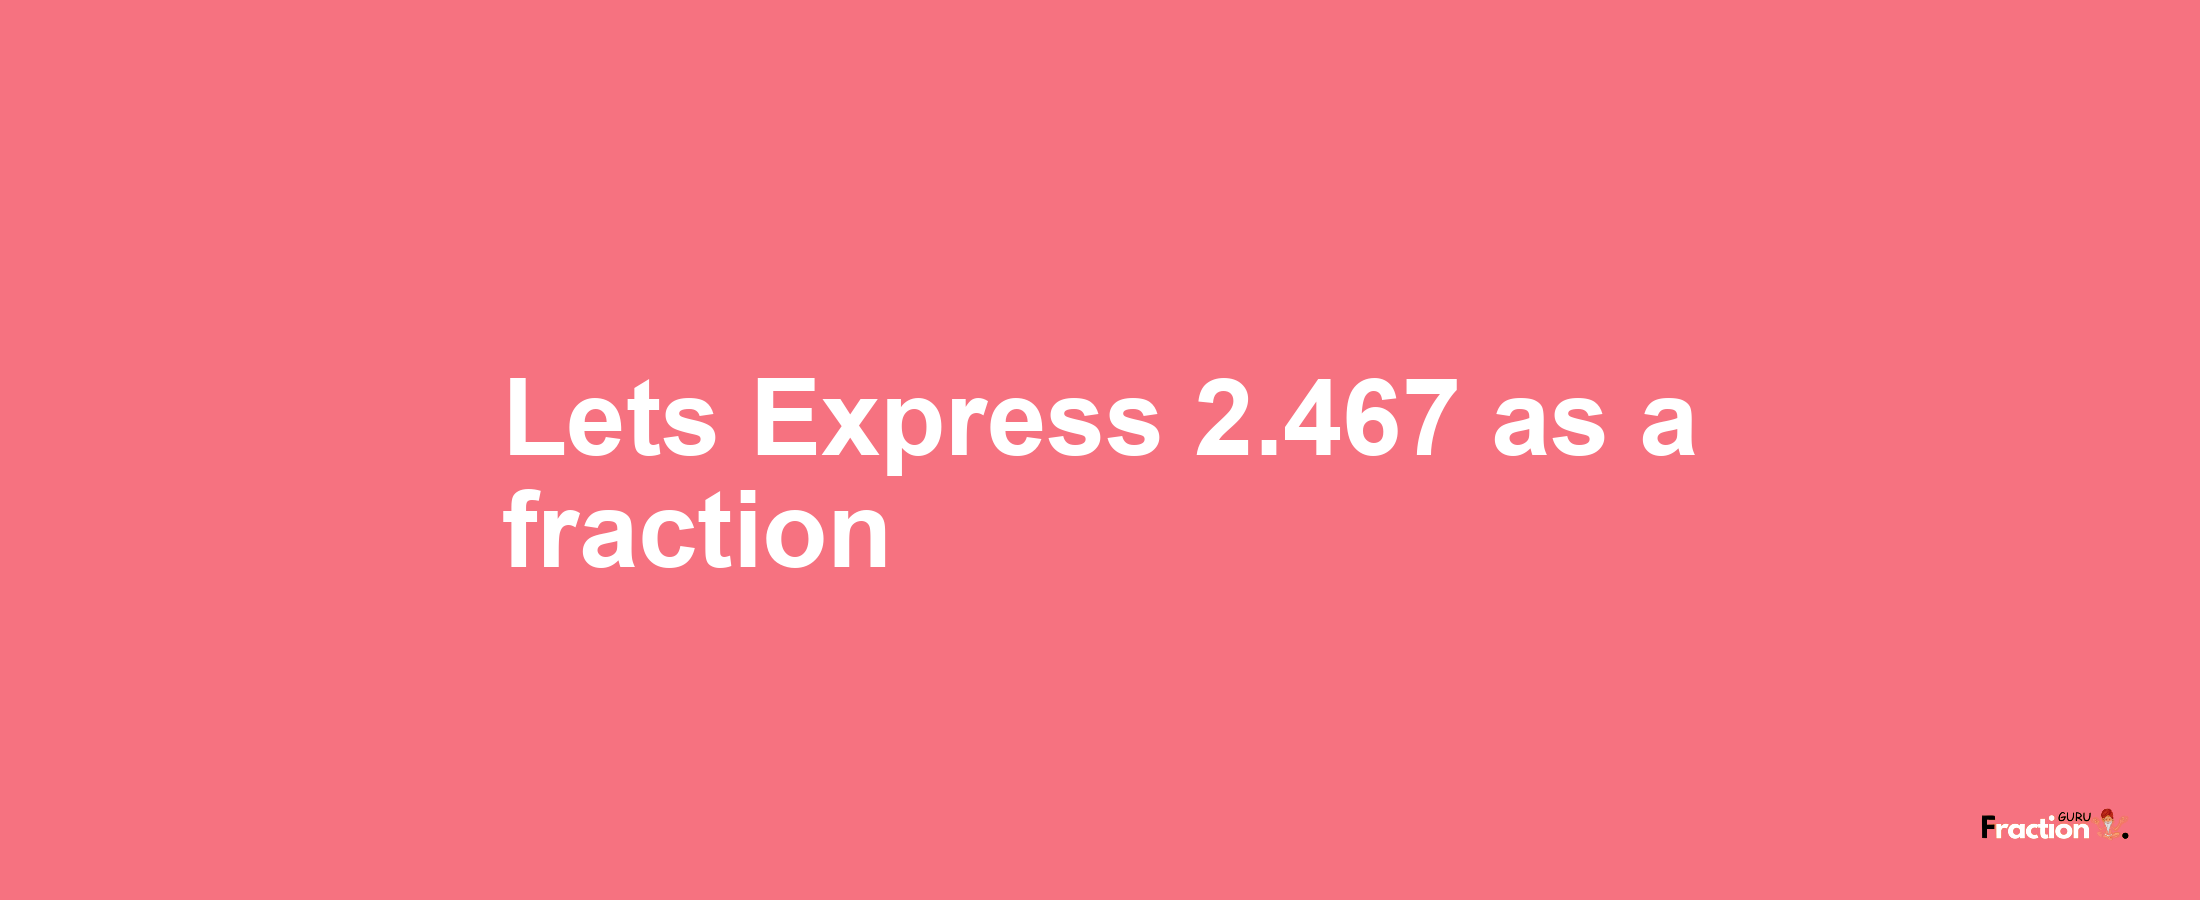 Lets Express 2.467 as afraction